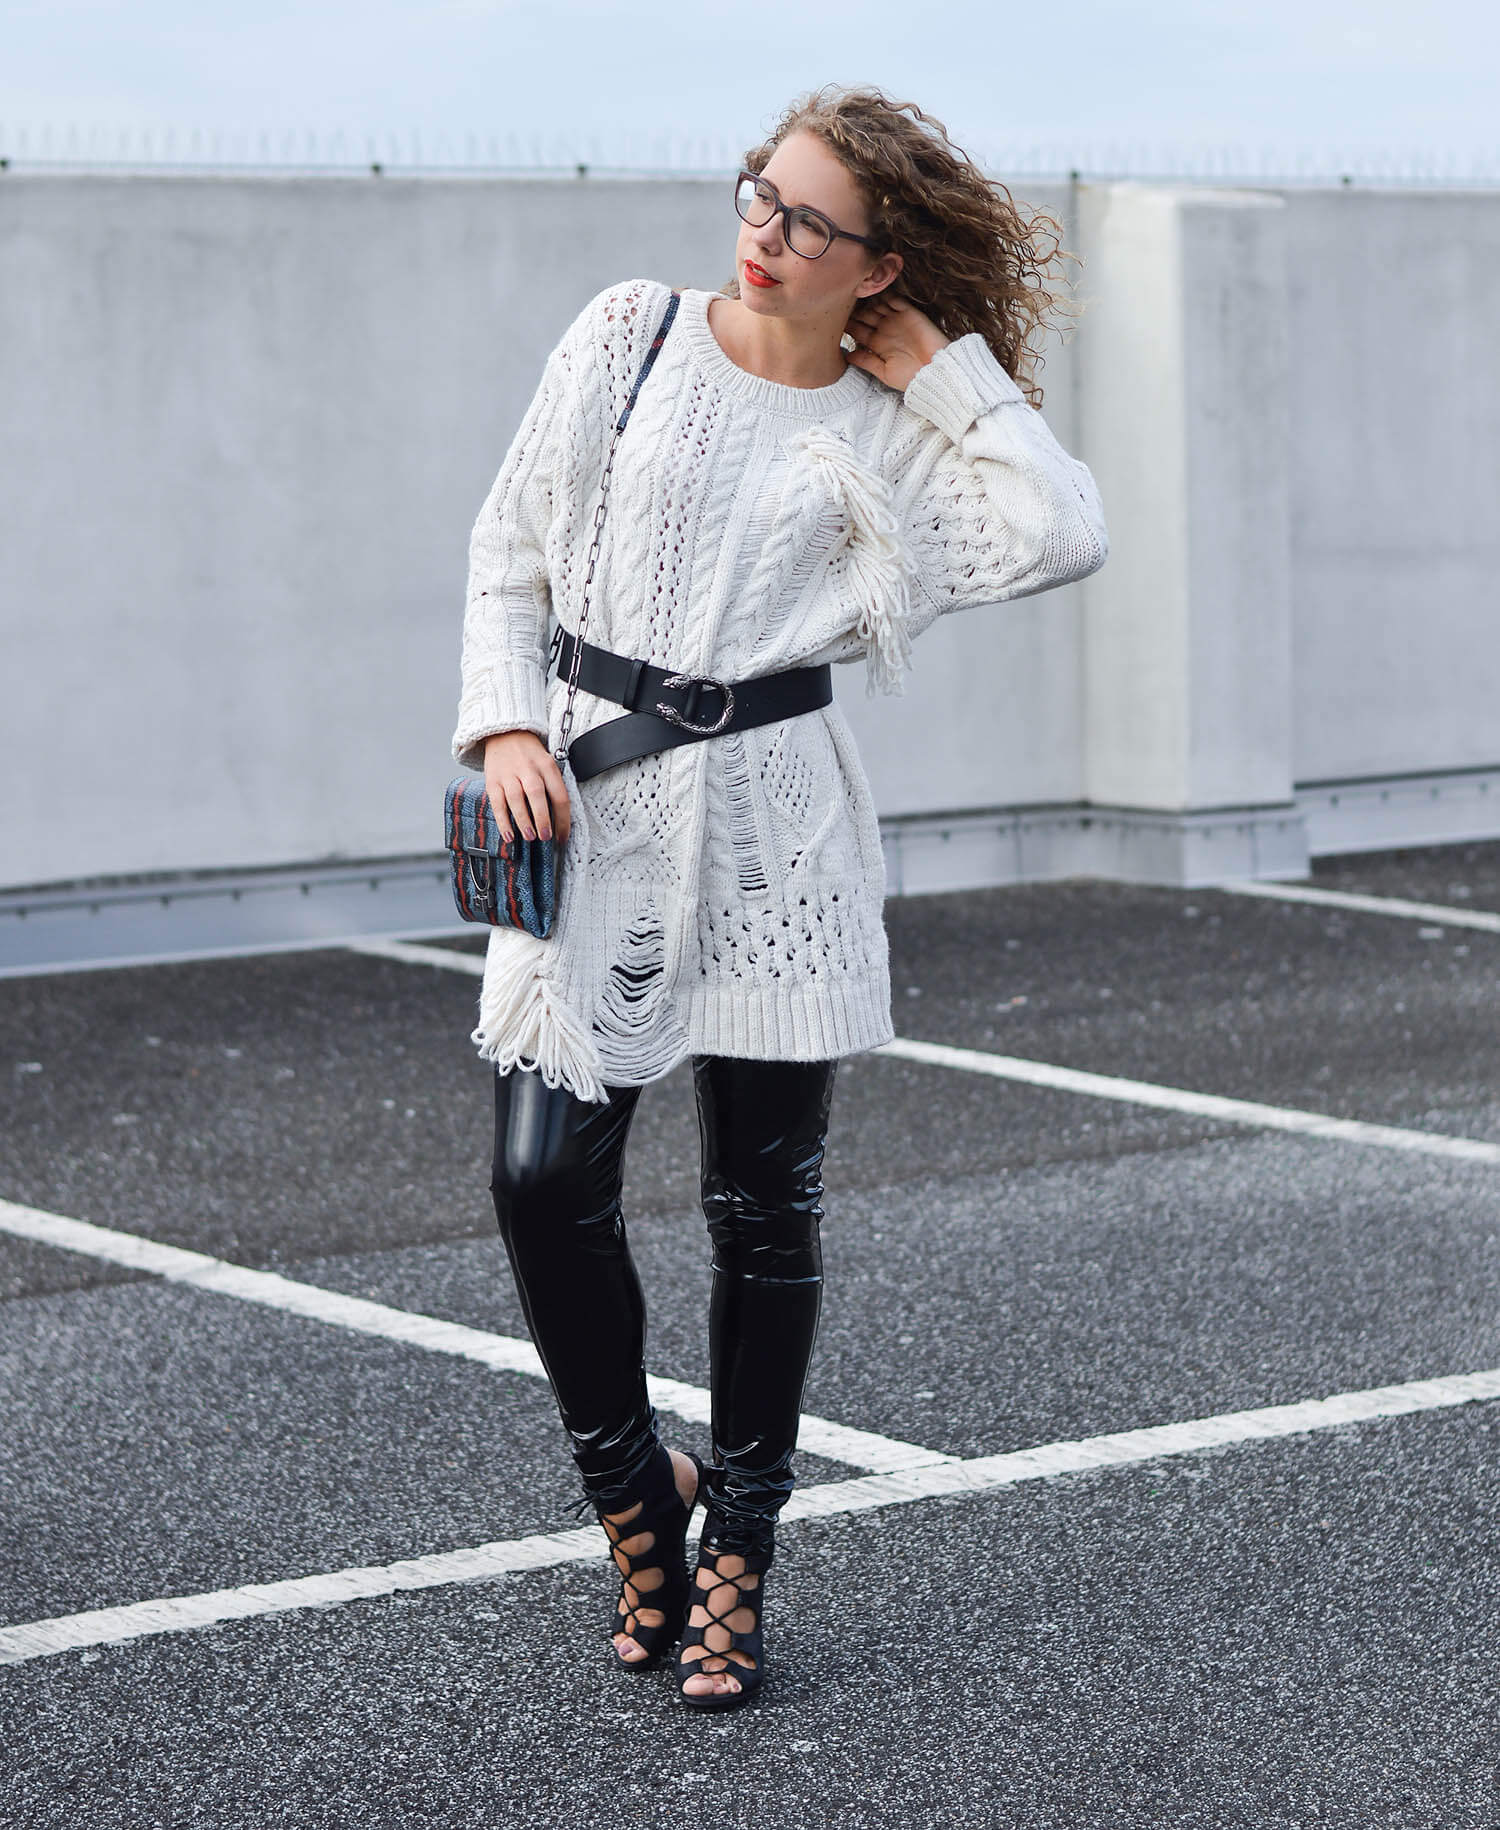 kationette-fashionblogger-nrw-Outfit-Vinyl-Pants-oversized-Zara-Knit-Coccinelle-Bag-and-Gucci-Belt